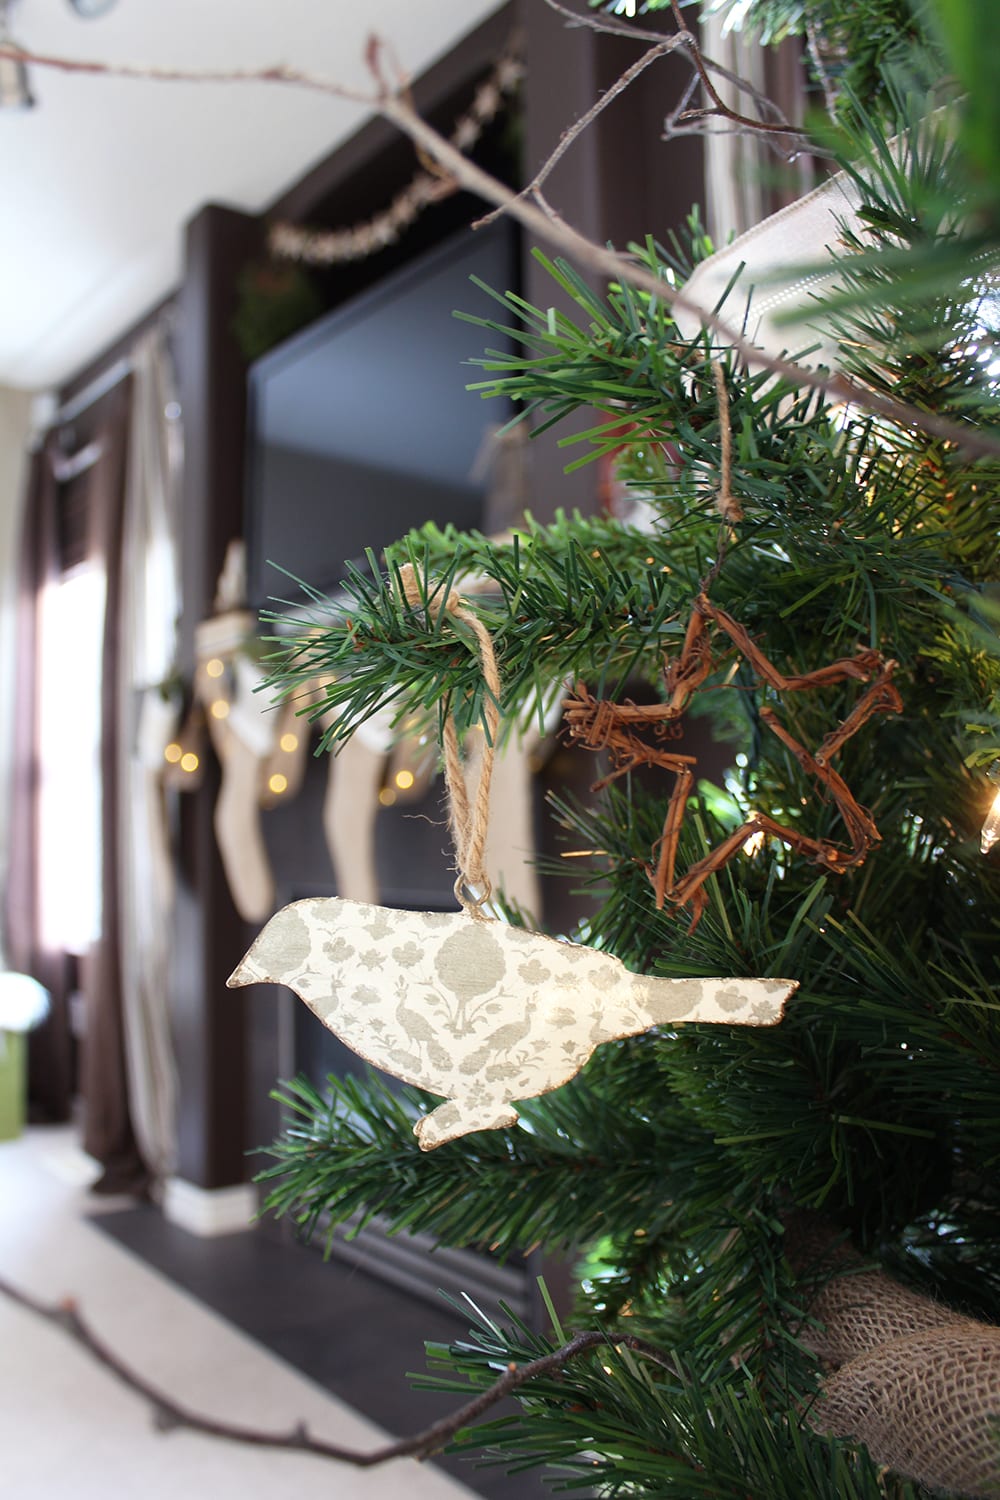 Nature inspired holiday decor featuring bird and star ornaments on a faux Christmas tree with real birch branches.